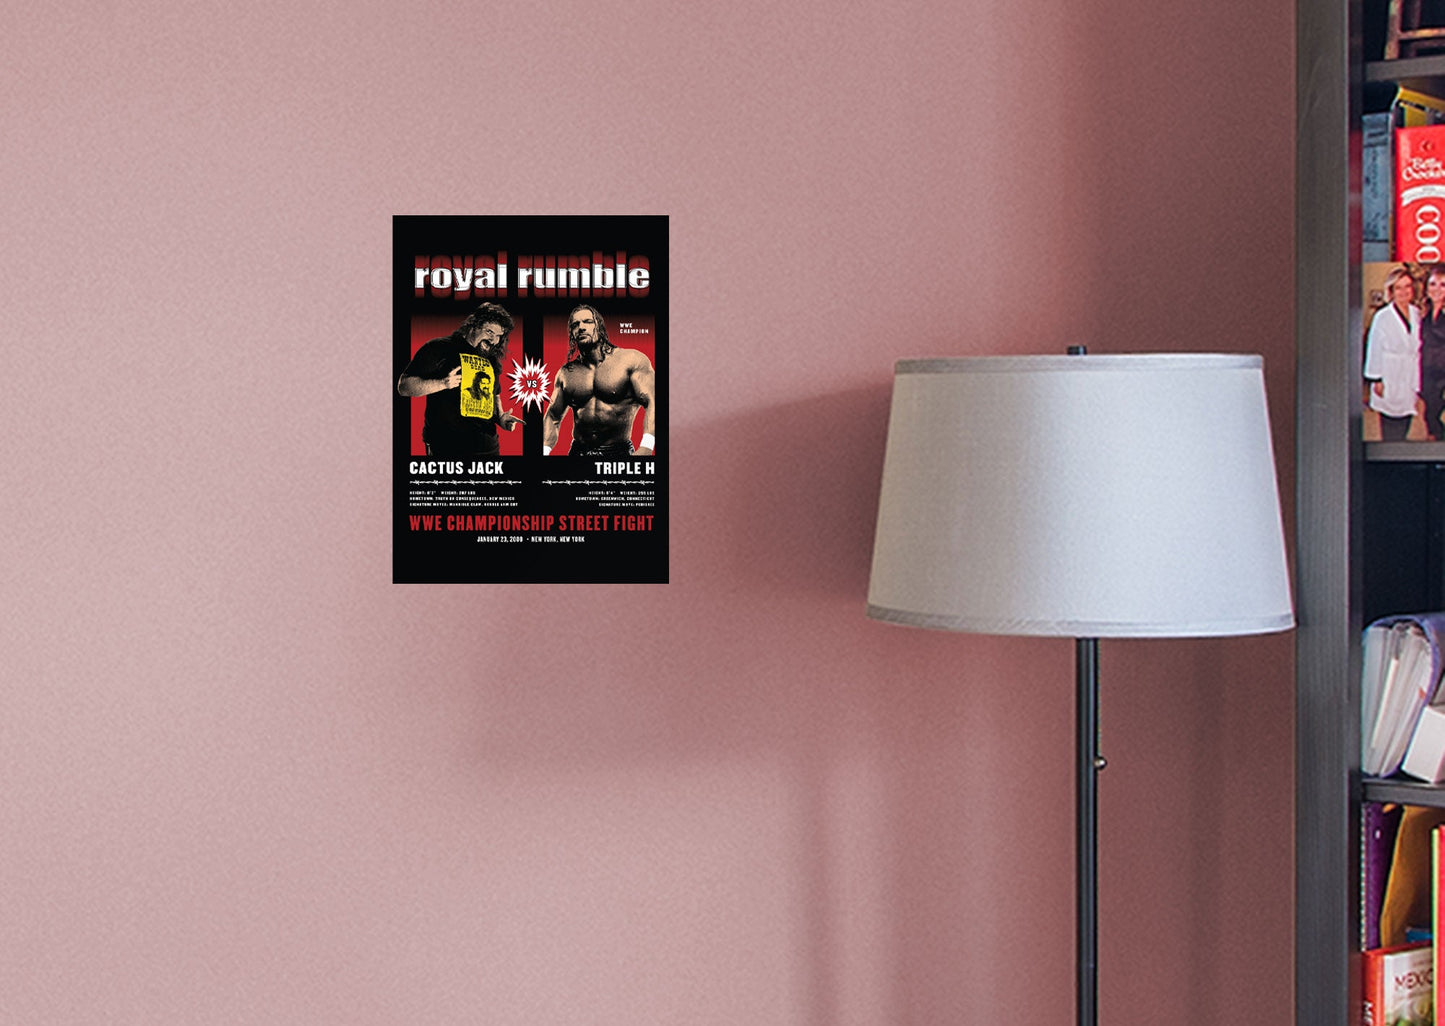 Cactus Jack and Triple H Royal Rumble 2000 Poster        - Officially Licensed WWE Removable Wall   Adhesive Decal